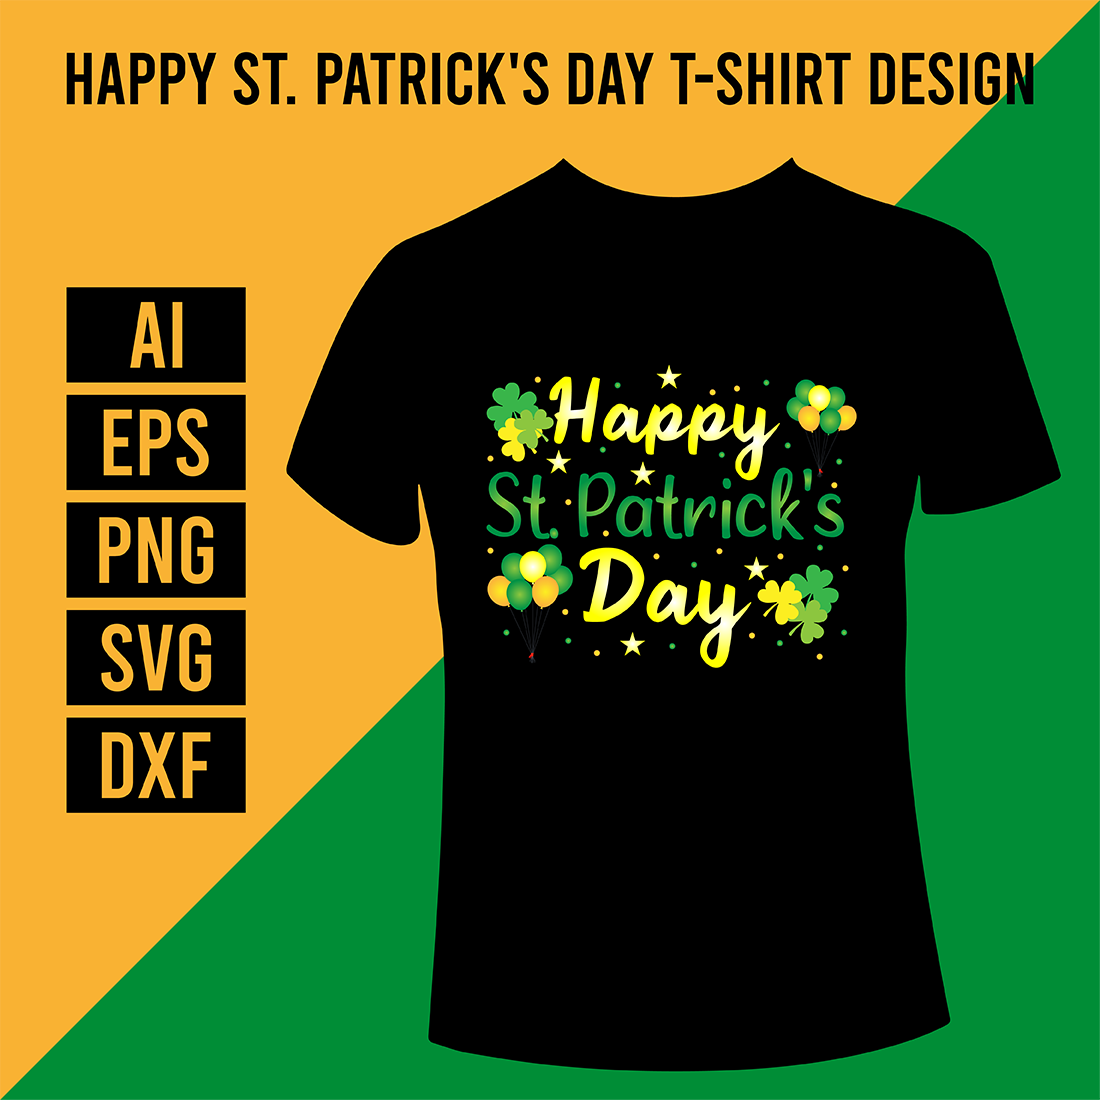 Happy St Patrick's Day T-Shirt Design cover image.